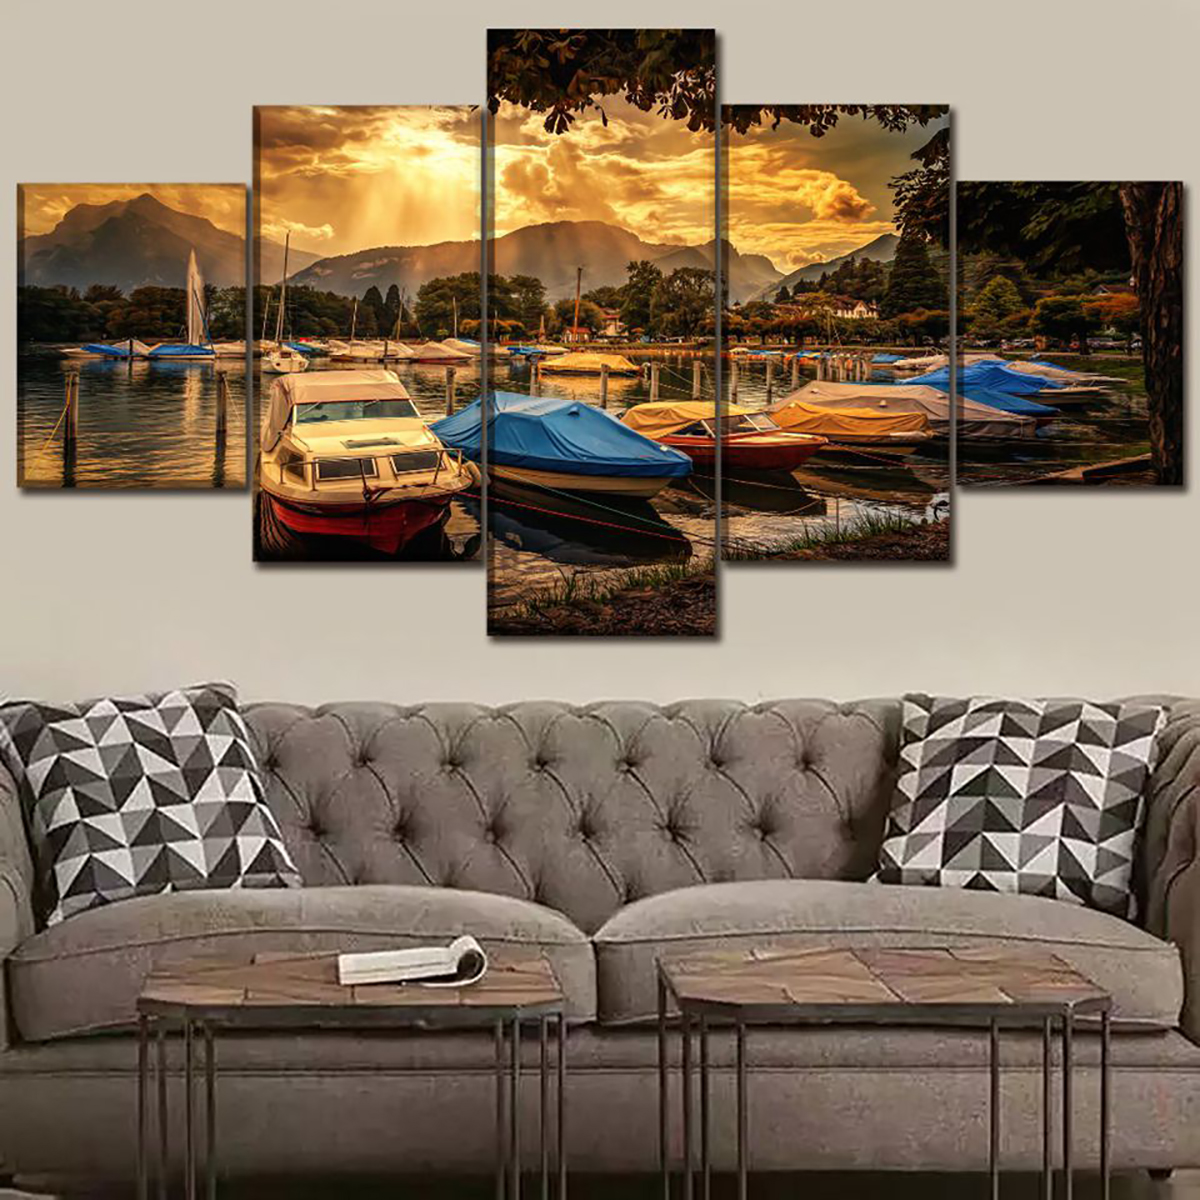 5Pcs-Canvas-Print-Paintings-Scenery-Oil-Painting-Wall-Decorative-Printing-Art-Picture-Frameless-Home-1758668-5